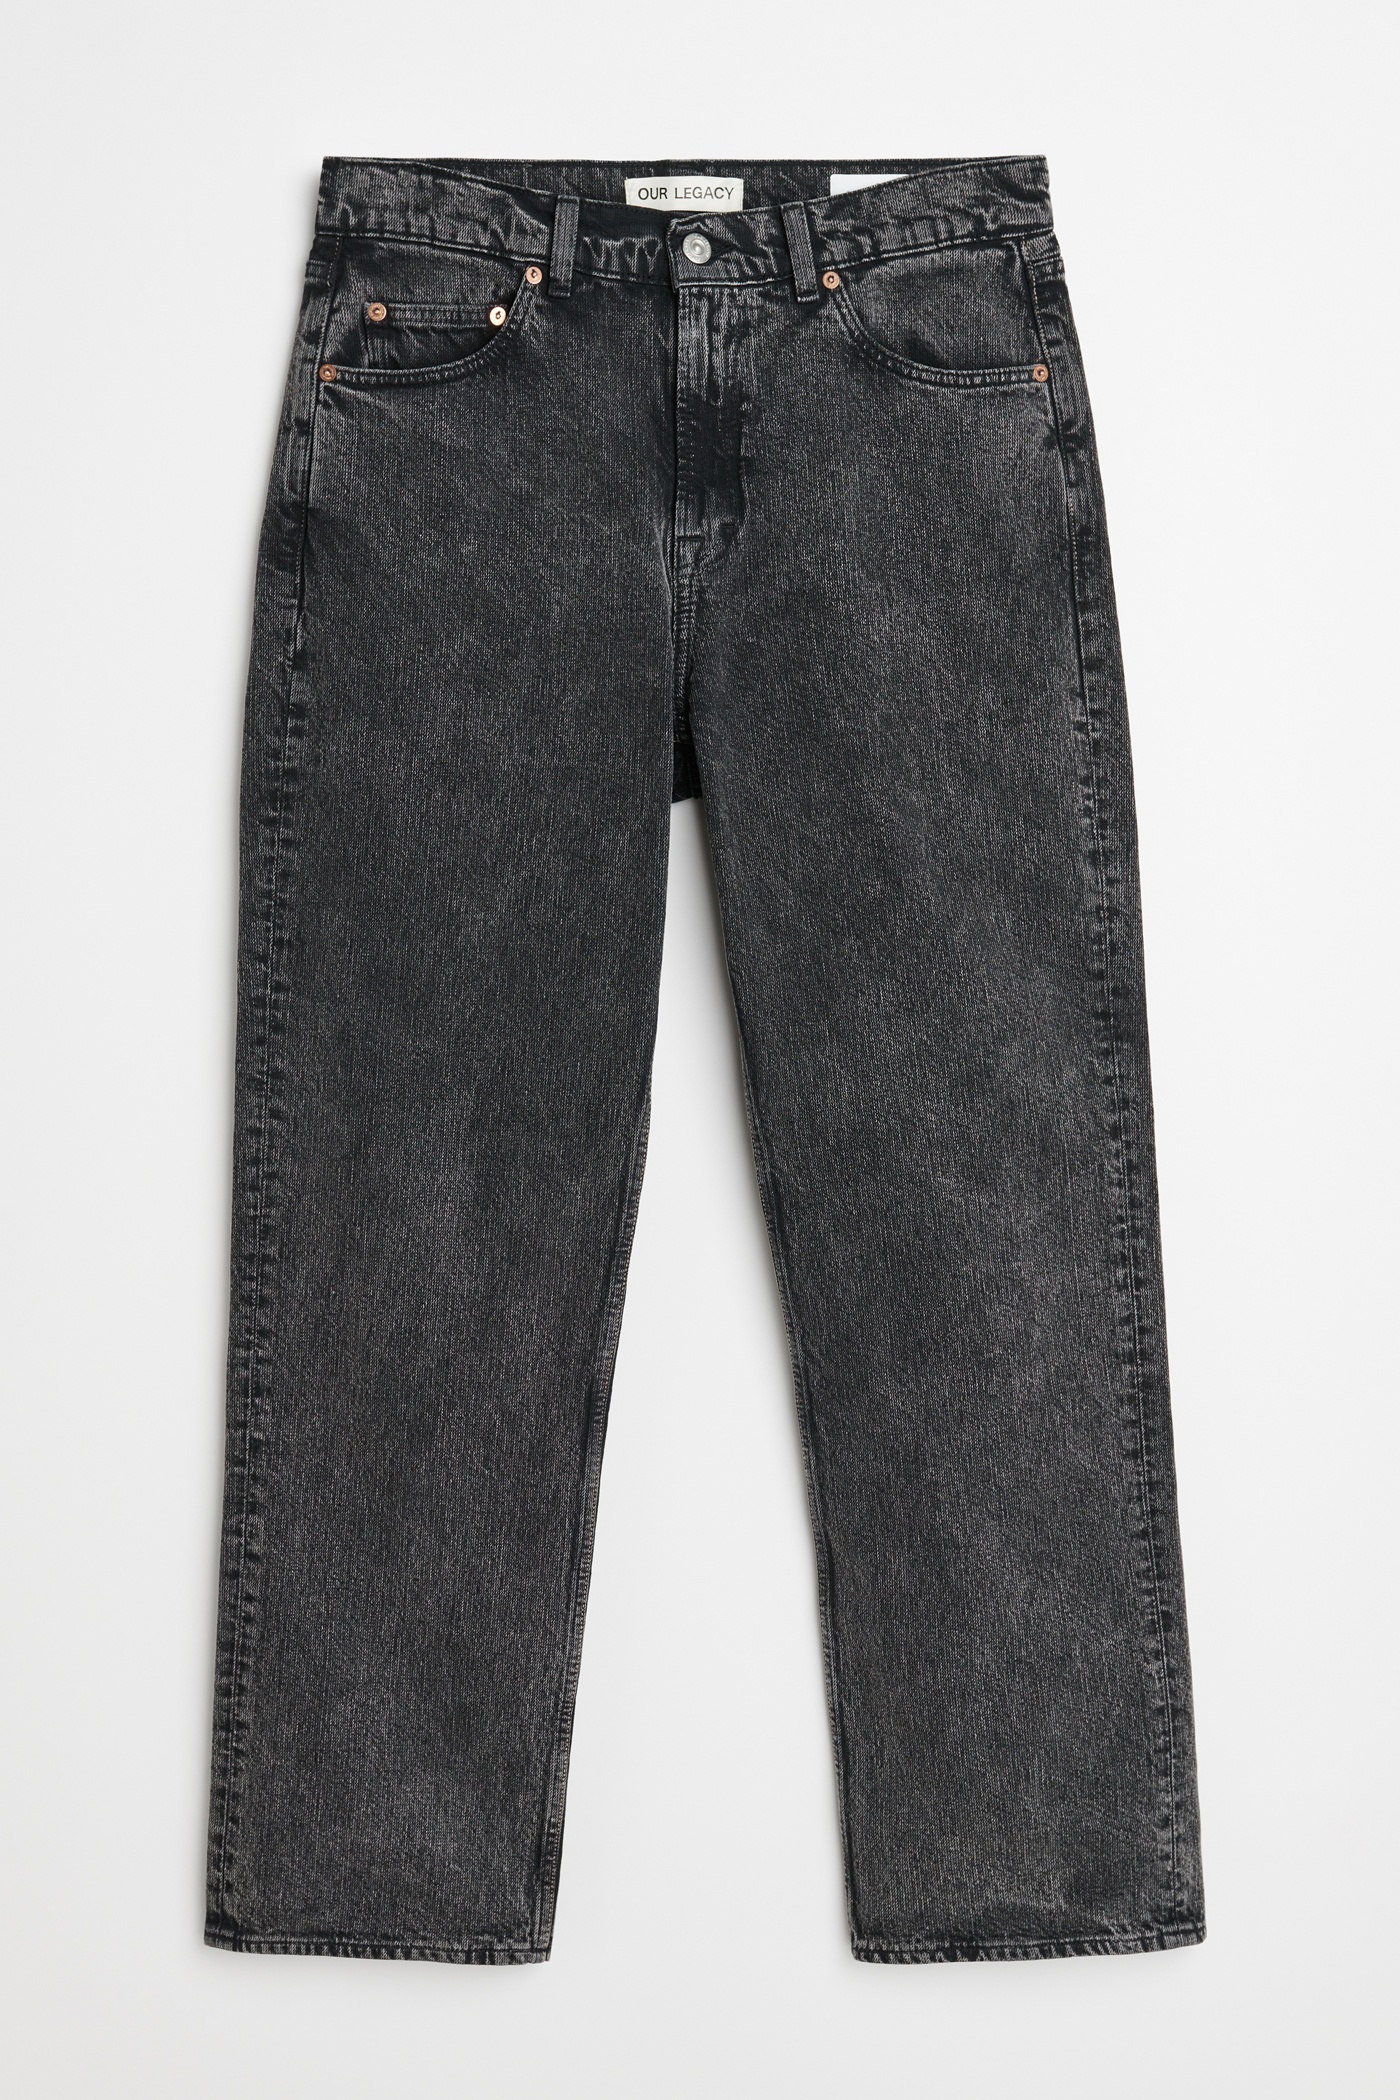 Formal Cut Overdyed Black Chain Twill - 1